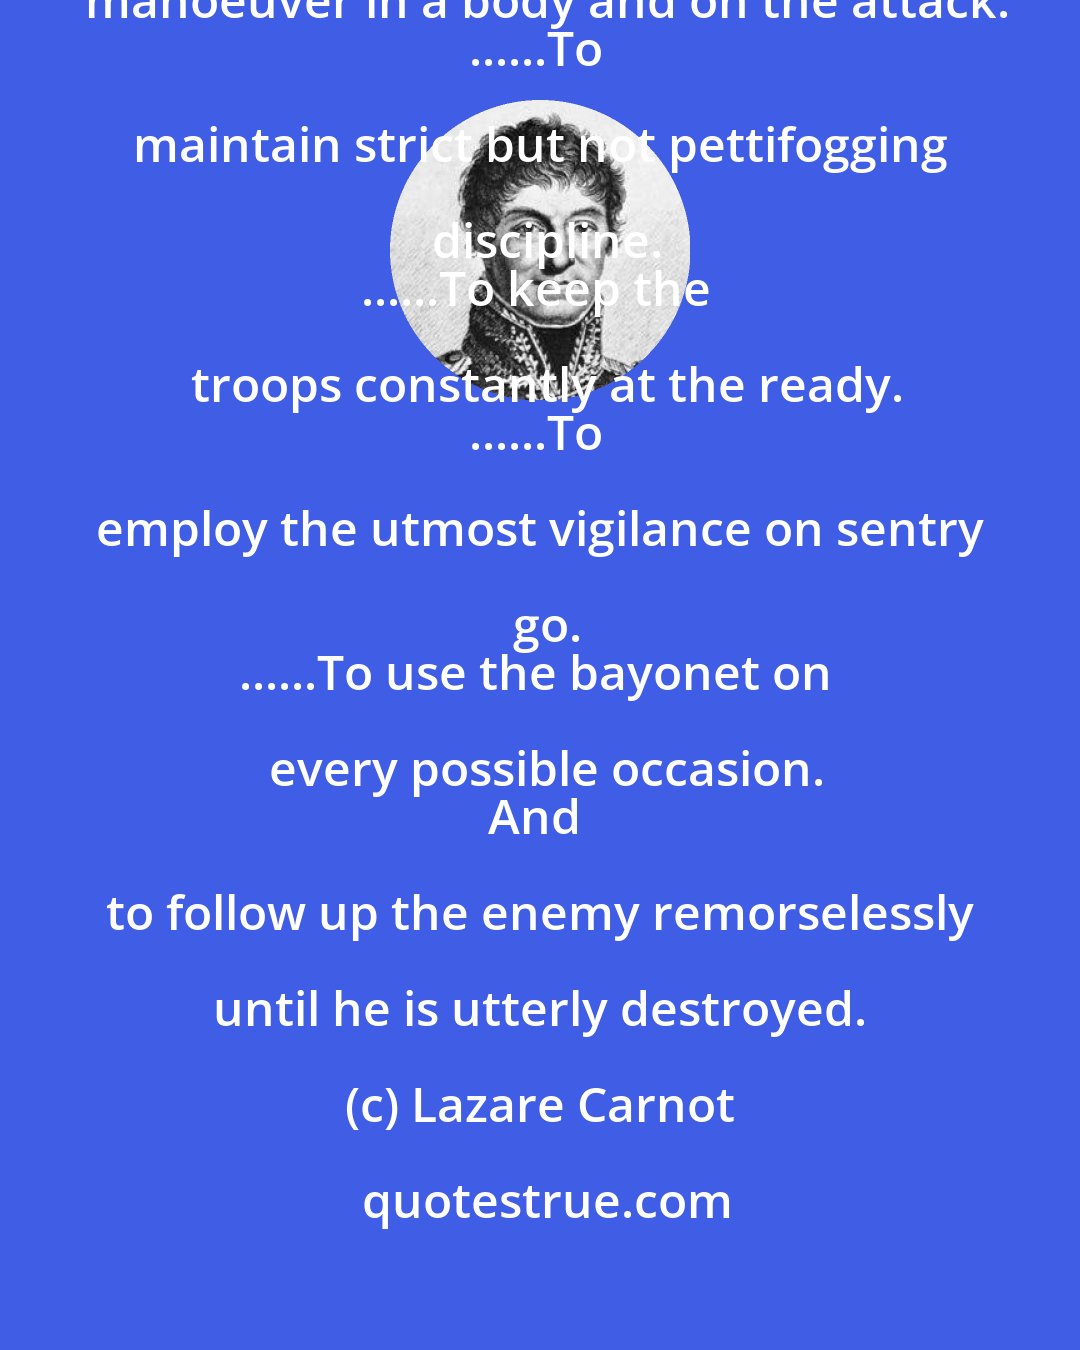 Lazare Carnot: The General Order is always:
......To manoeuver in a body and on the attack.
......To maintain strict but not pettifogging discipline.
......To keep the troops constantly at the ready.
......To employ the utmost vigilance on sentry go.
......To use the bayonet on every possible occasion.
And to follow up the enemy remorselessly until he is utterly destroyed.